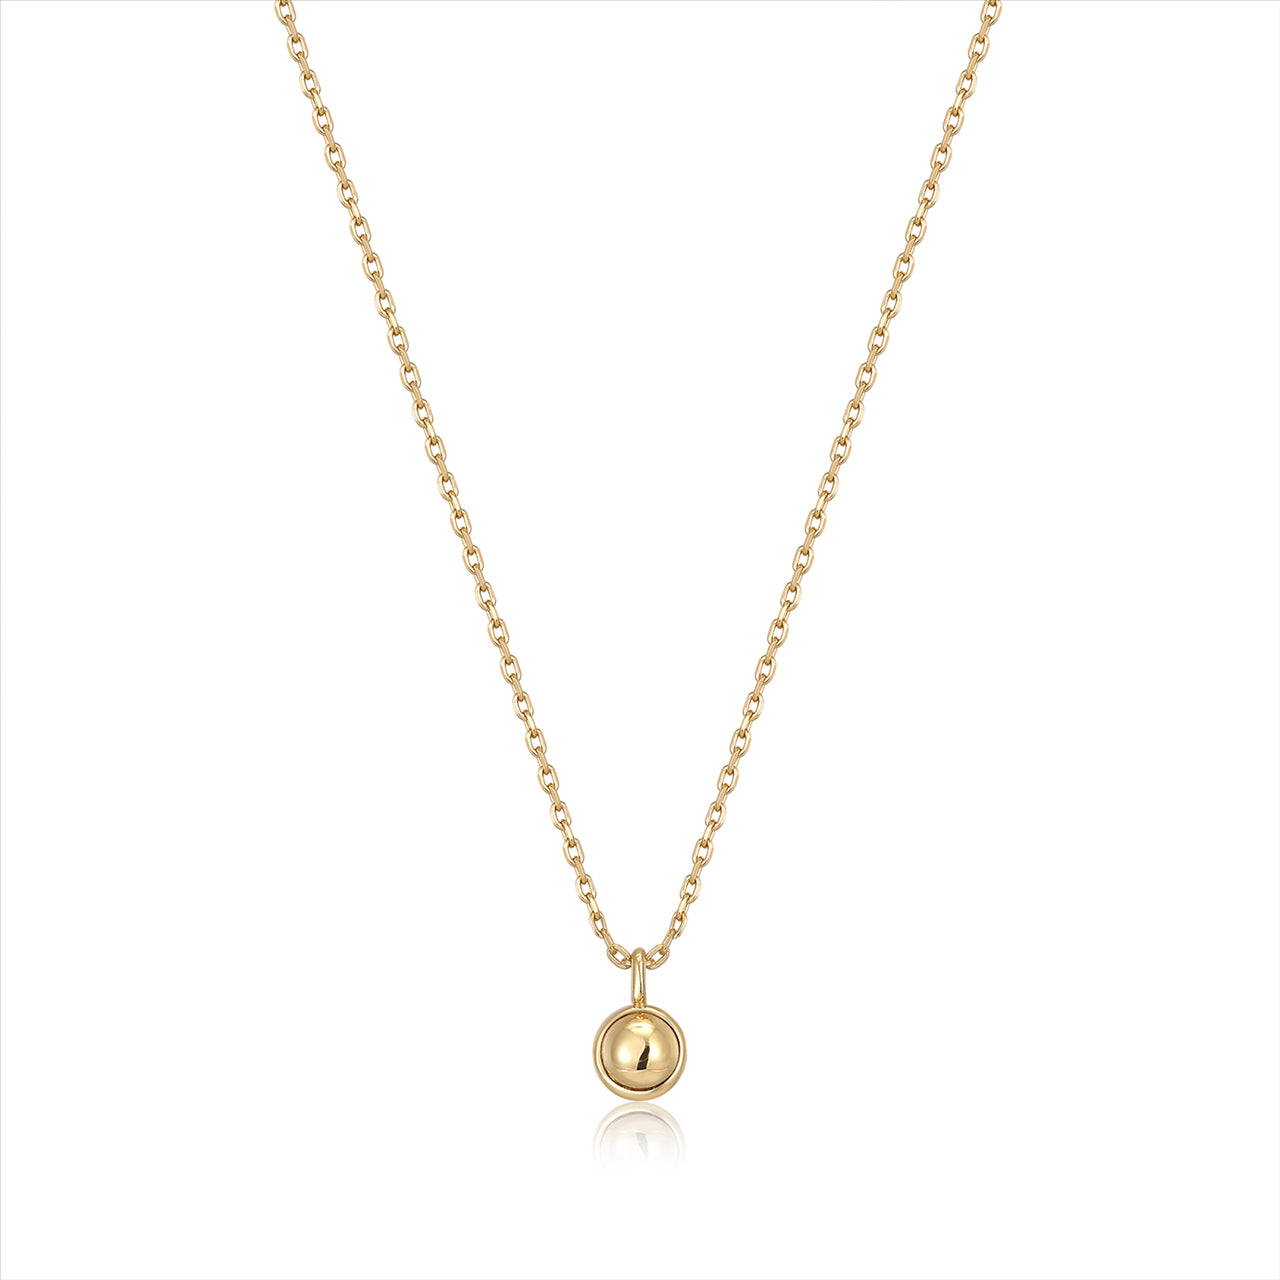 Ania Haie Gold Orb Drop Pendant Necklace